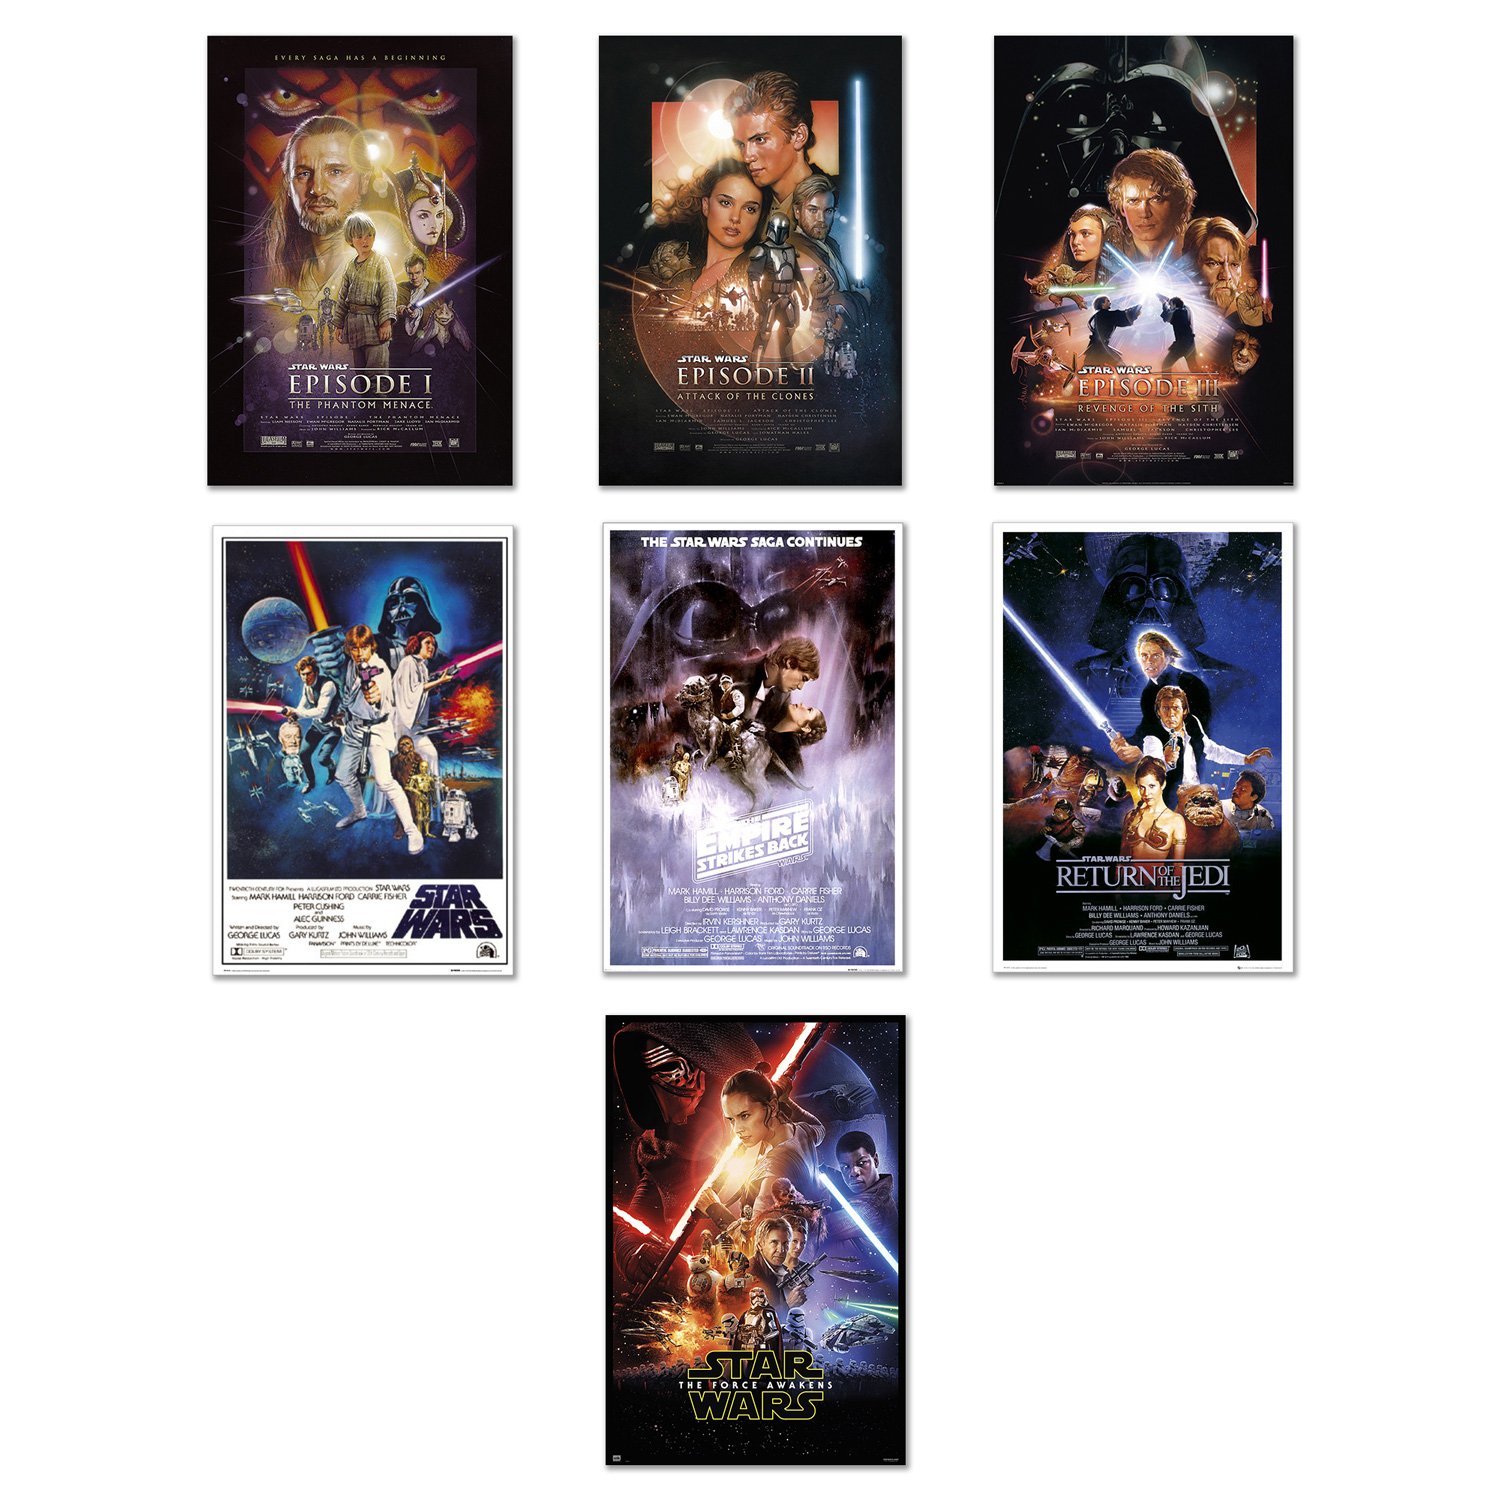 POSTER STOP ONLINE Star Wars Episode I, II, III, IV, V, VI & VII - Movie Poster Set (7 Individual Full Size Movie Posters) (Size 24" x 36" ...